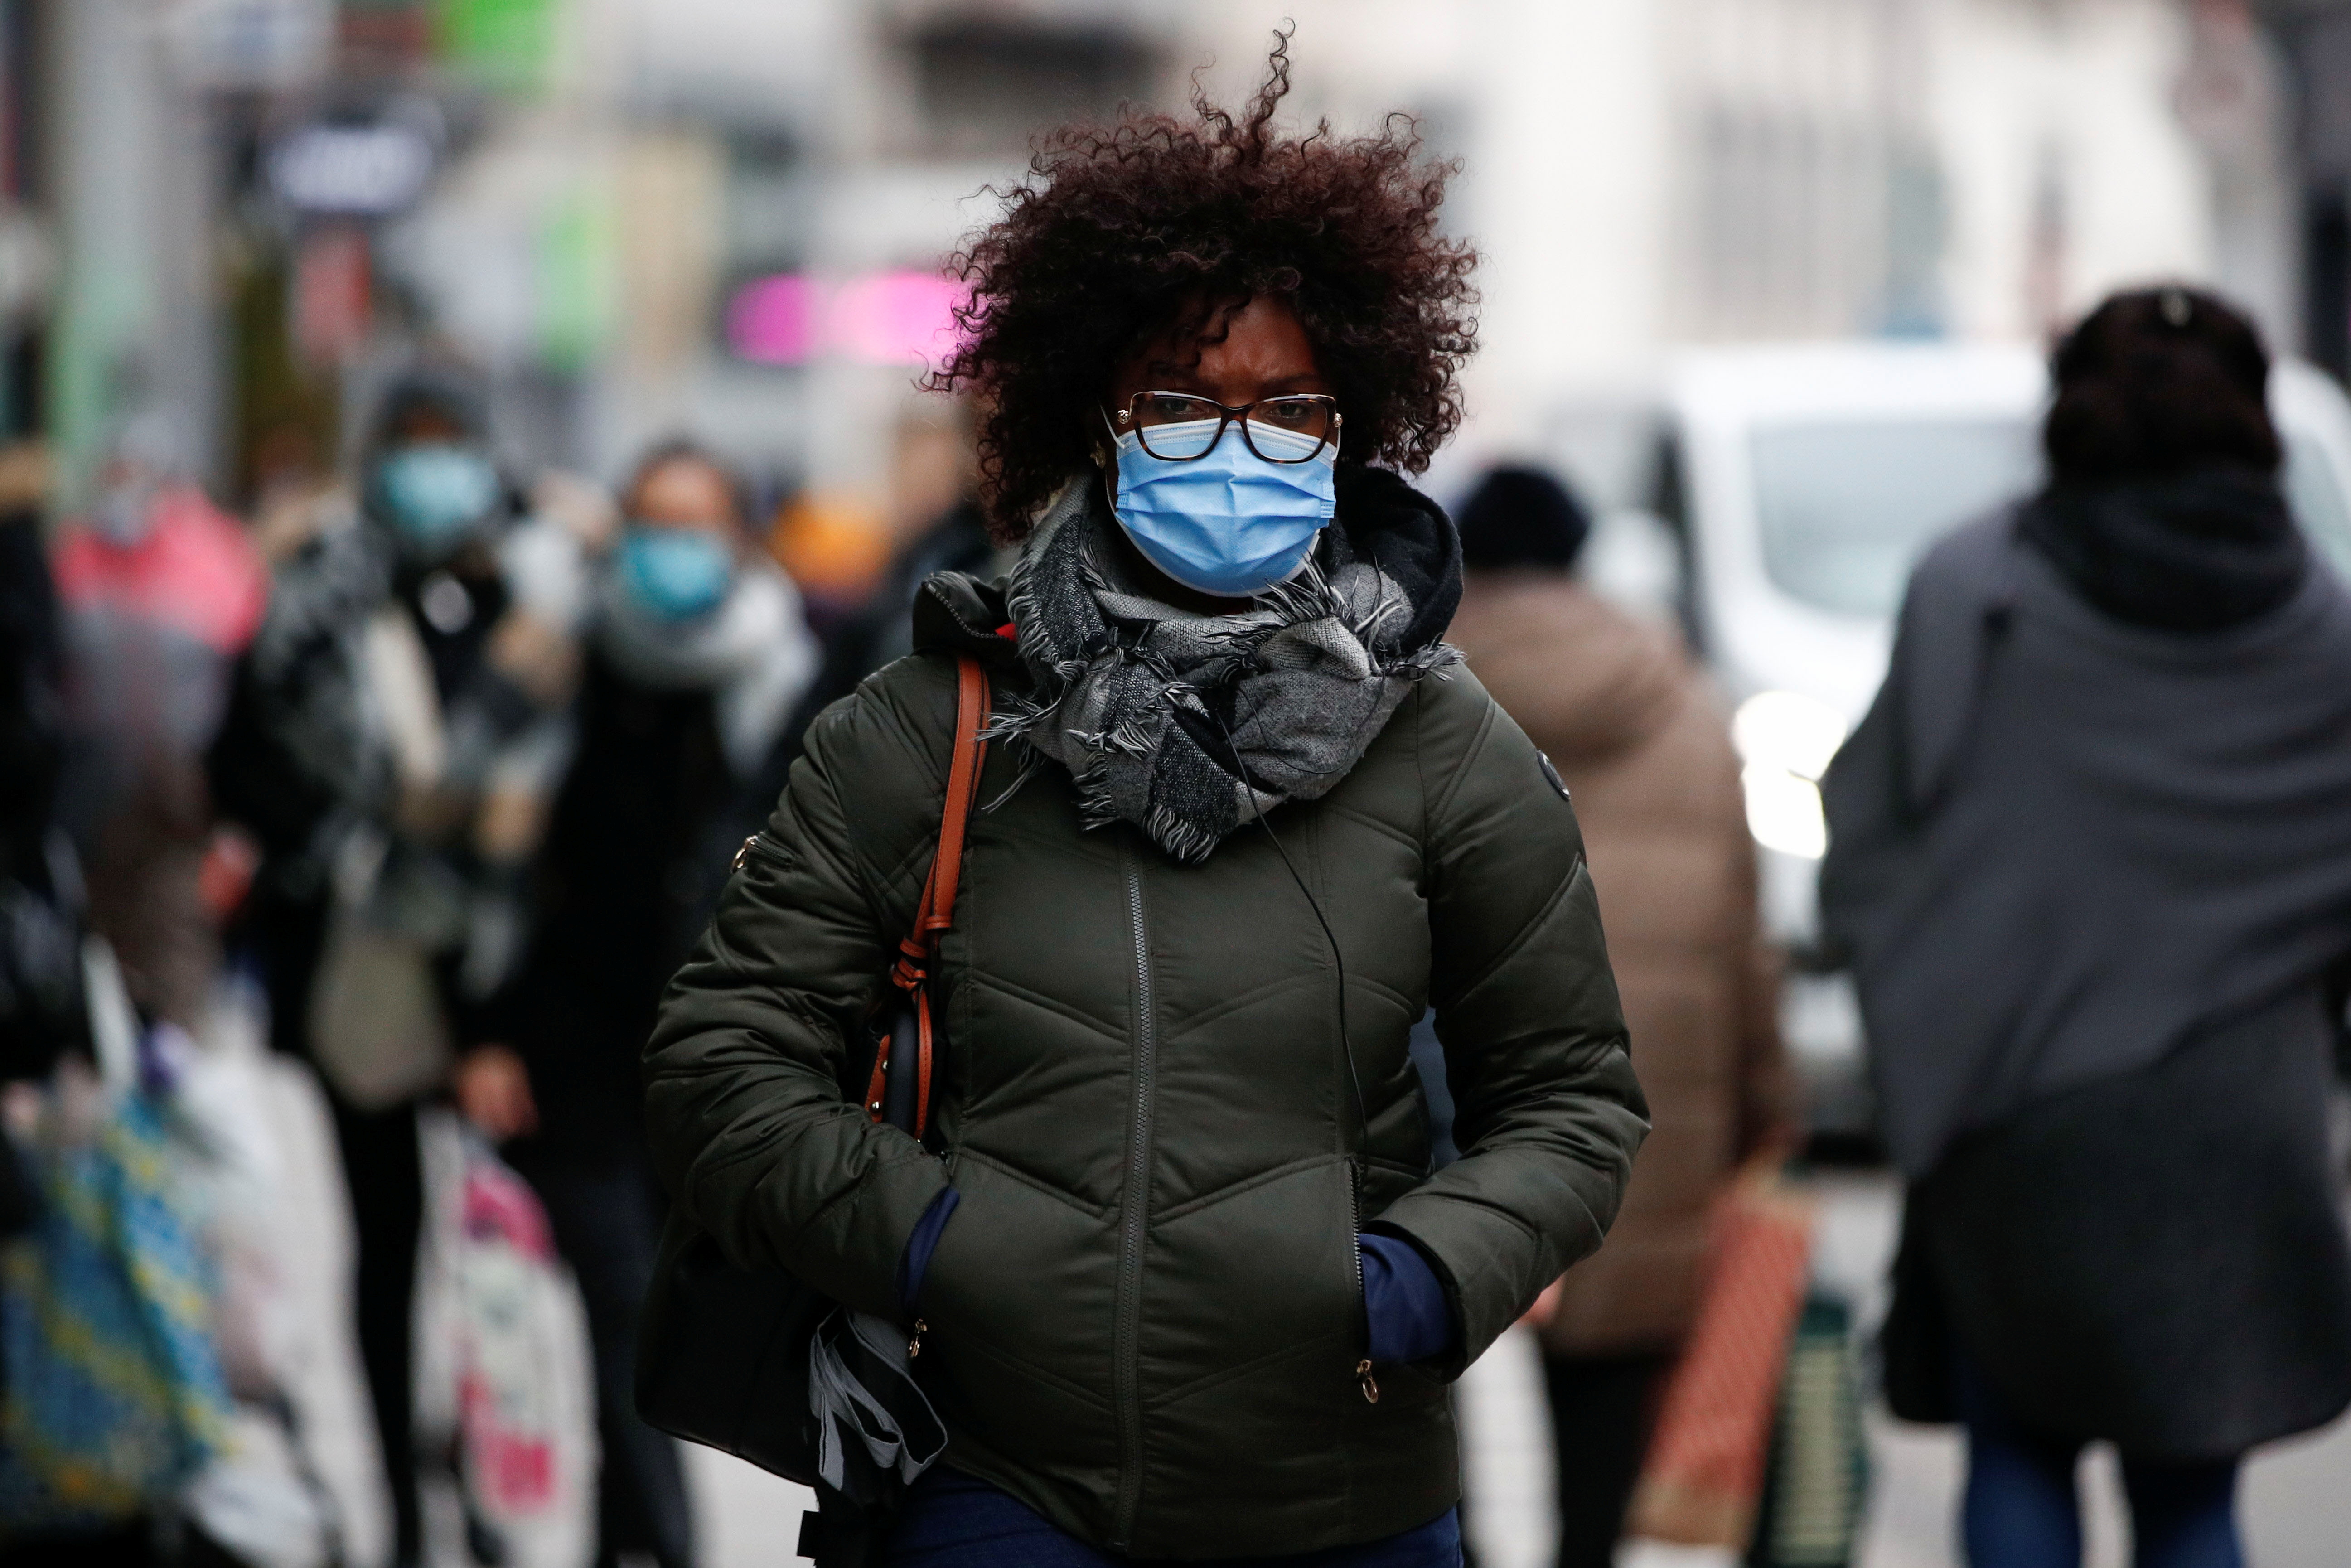 People wearing protective masks walk on a street, following the government's restrictions imposed to contain the spread of coronavirus disease (COVID-19) in Brussels